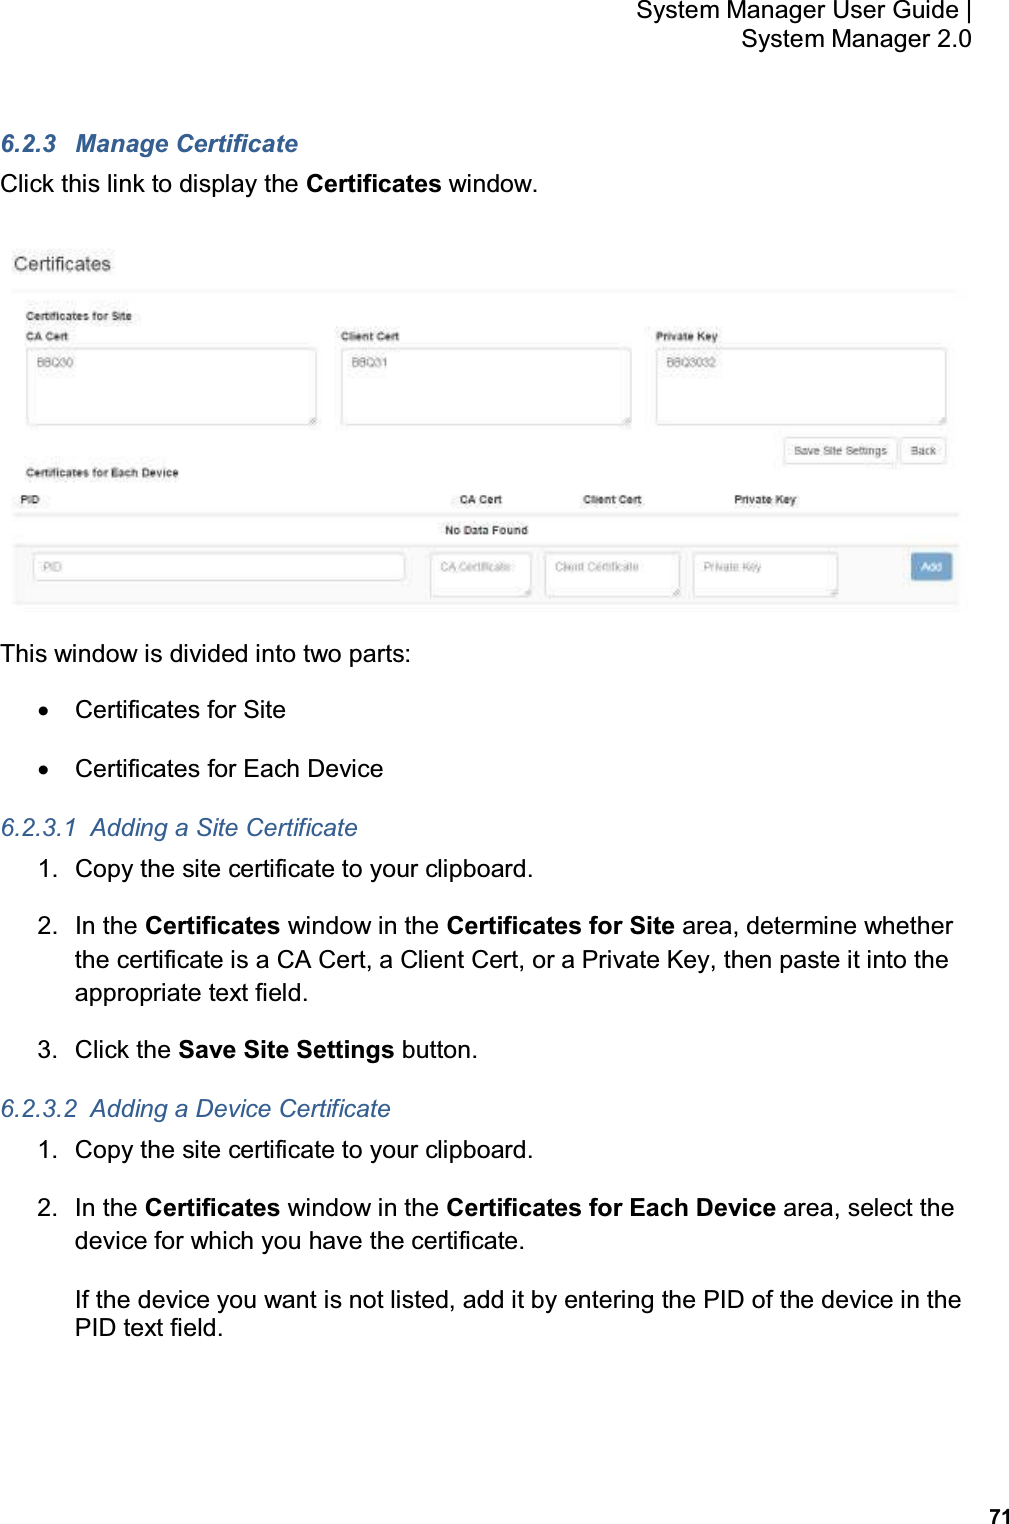           71 System Manager User Guide |  System Manager 2.0 6.2.3  Manage Certificate Click this link to display the Certificates window.  This window is divided into two parts: •  Certificates for Site •  Certificates for Each Device 6.2.3.1  Adding a Site Certificate 1.  Copy the site certificate to your clipboard. 2.  In the Certificates window in the Certificates for Site area, determine whether the certificate is a CA Cert, a Client Cert, or a Private Key, then paste it into the appropriate text field. 3.  Click the Save Site Settings button. 6.2.3.2  Adding a Device Certificate 1.  Copy the site certificate to your clipboard. 2.  In the Certificates window in the Certificates for Each Device area, select the device for which you have the certificate. If the device you want is not listed, add it by entering the PID of the device in the PID text field. 